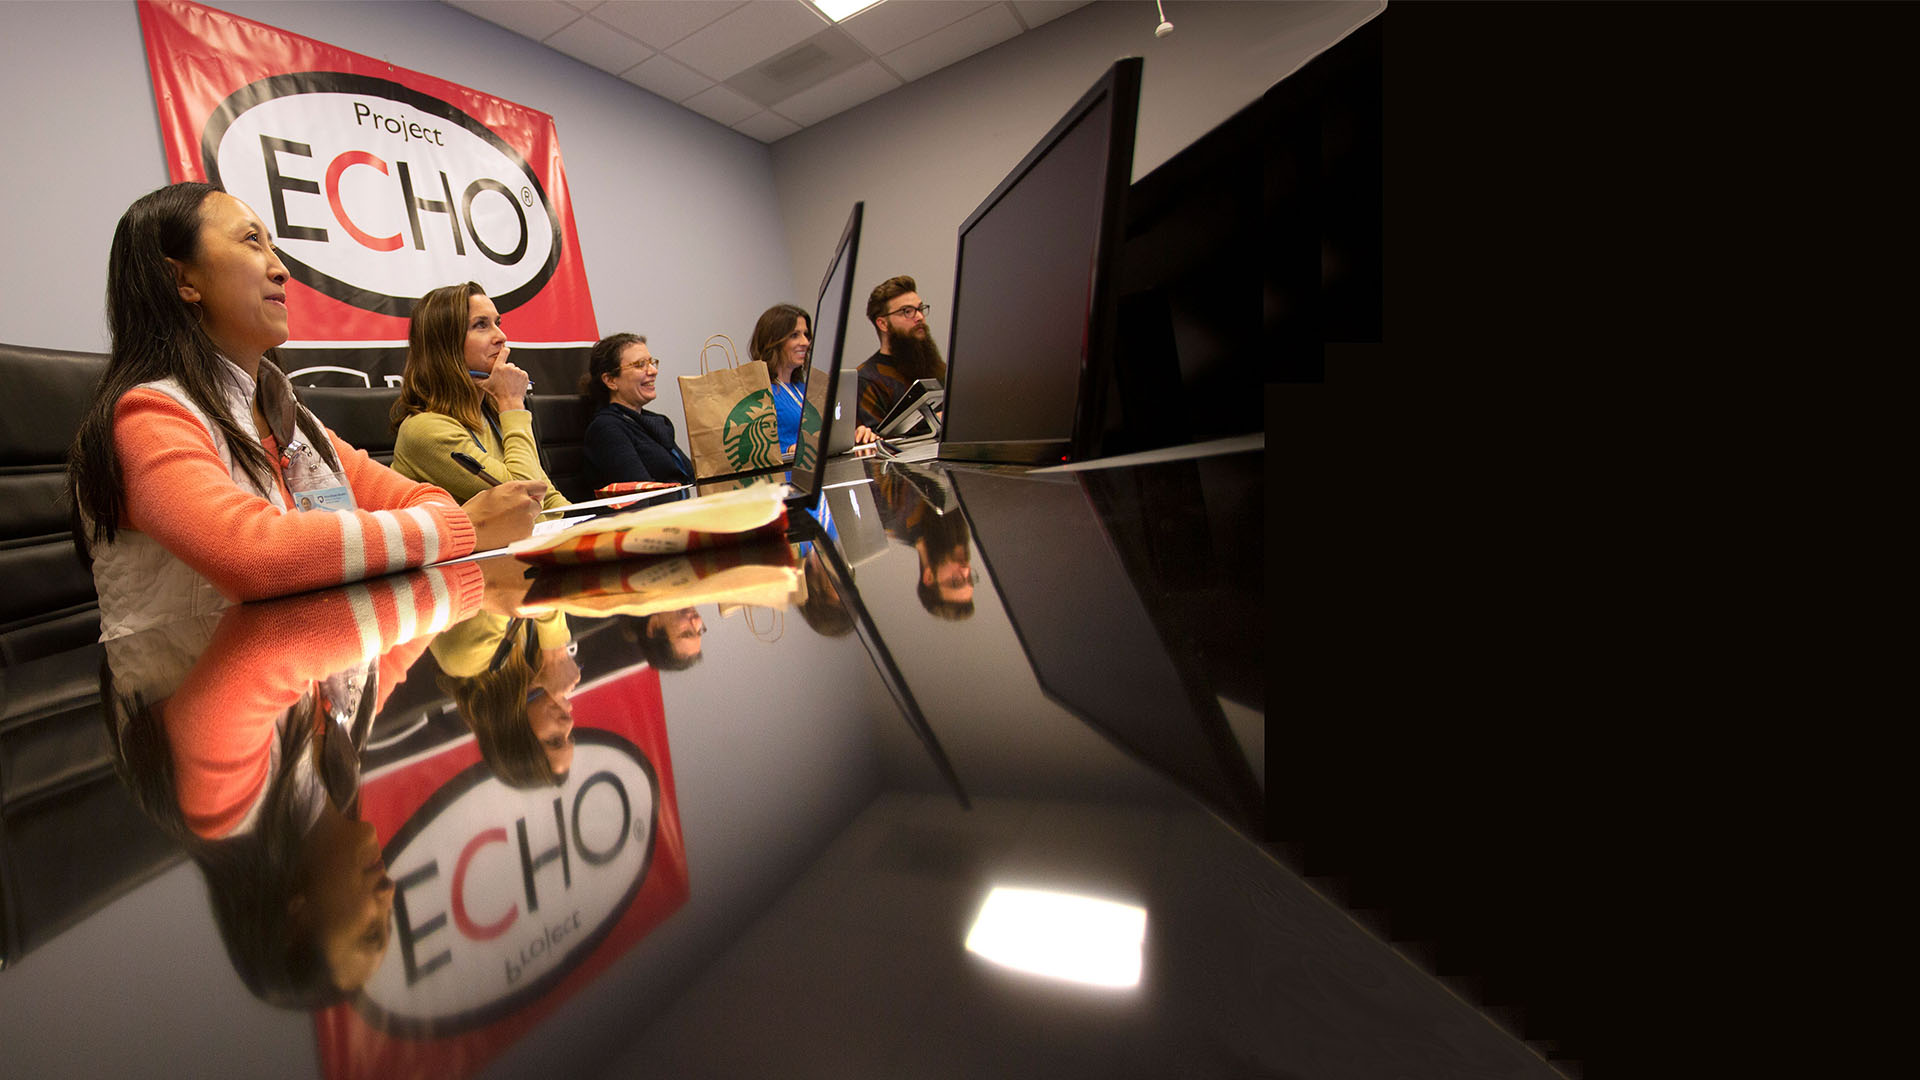 A group of research scientists sitting in front of a conference table with the ECHO logo on the background wall. 